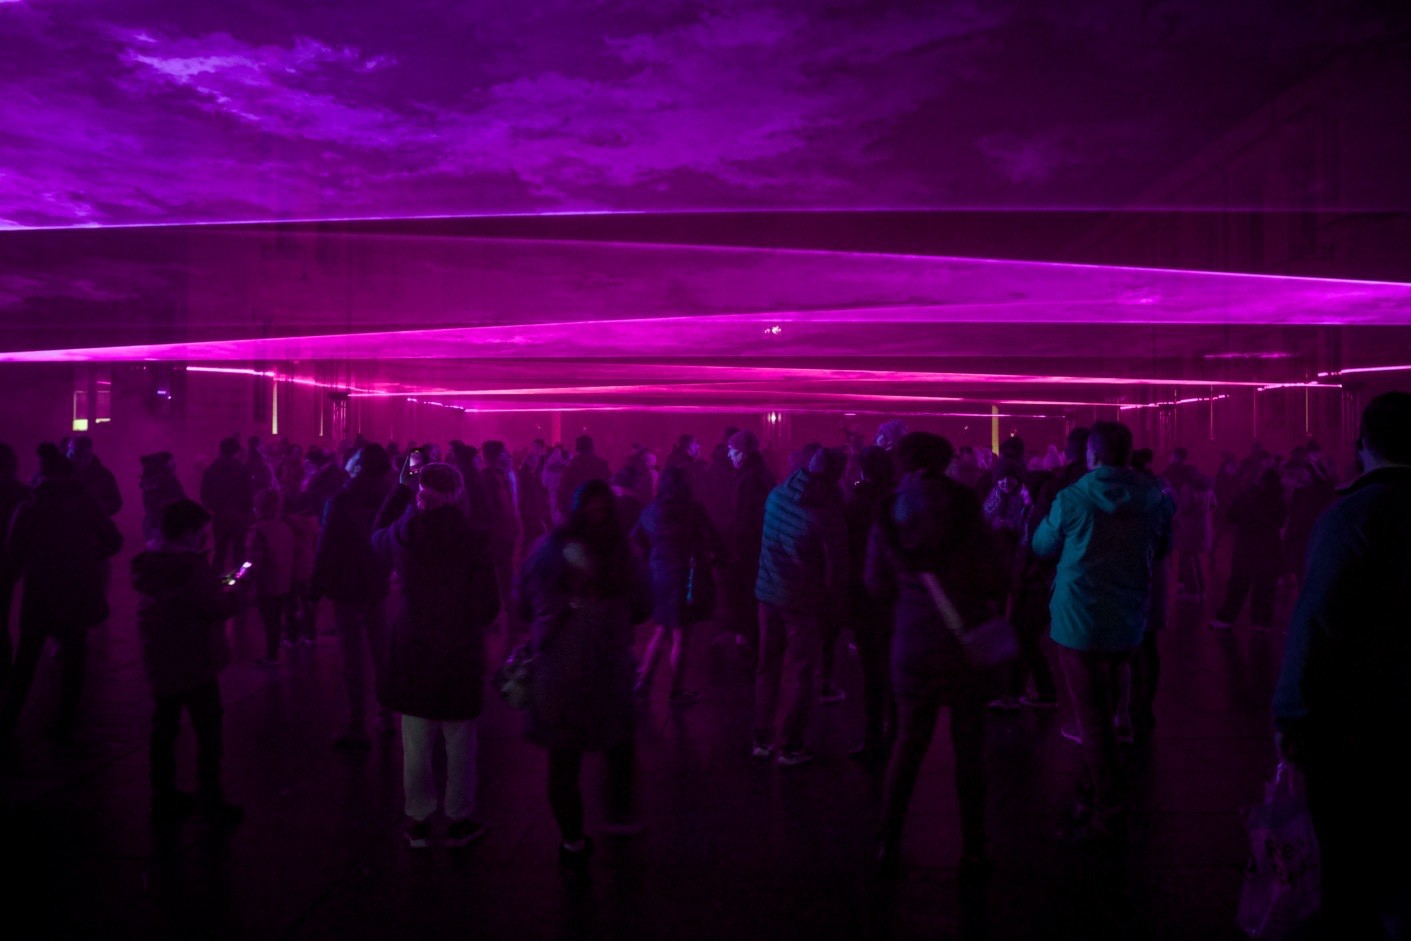 This image depicts a crowd of people gathered in an indoor space illuminated by vibrant purple and pink lights. The lights create horizontal lines across the image, giving the scene a dynamic and somewhat futuristic appearance. The people are dressed in casual attire, suggesting a public event or gathering.